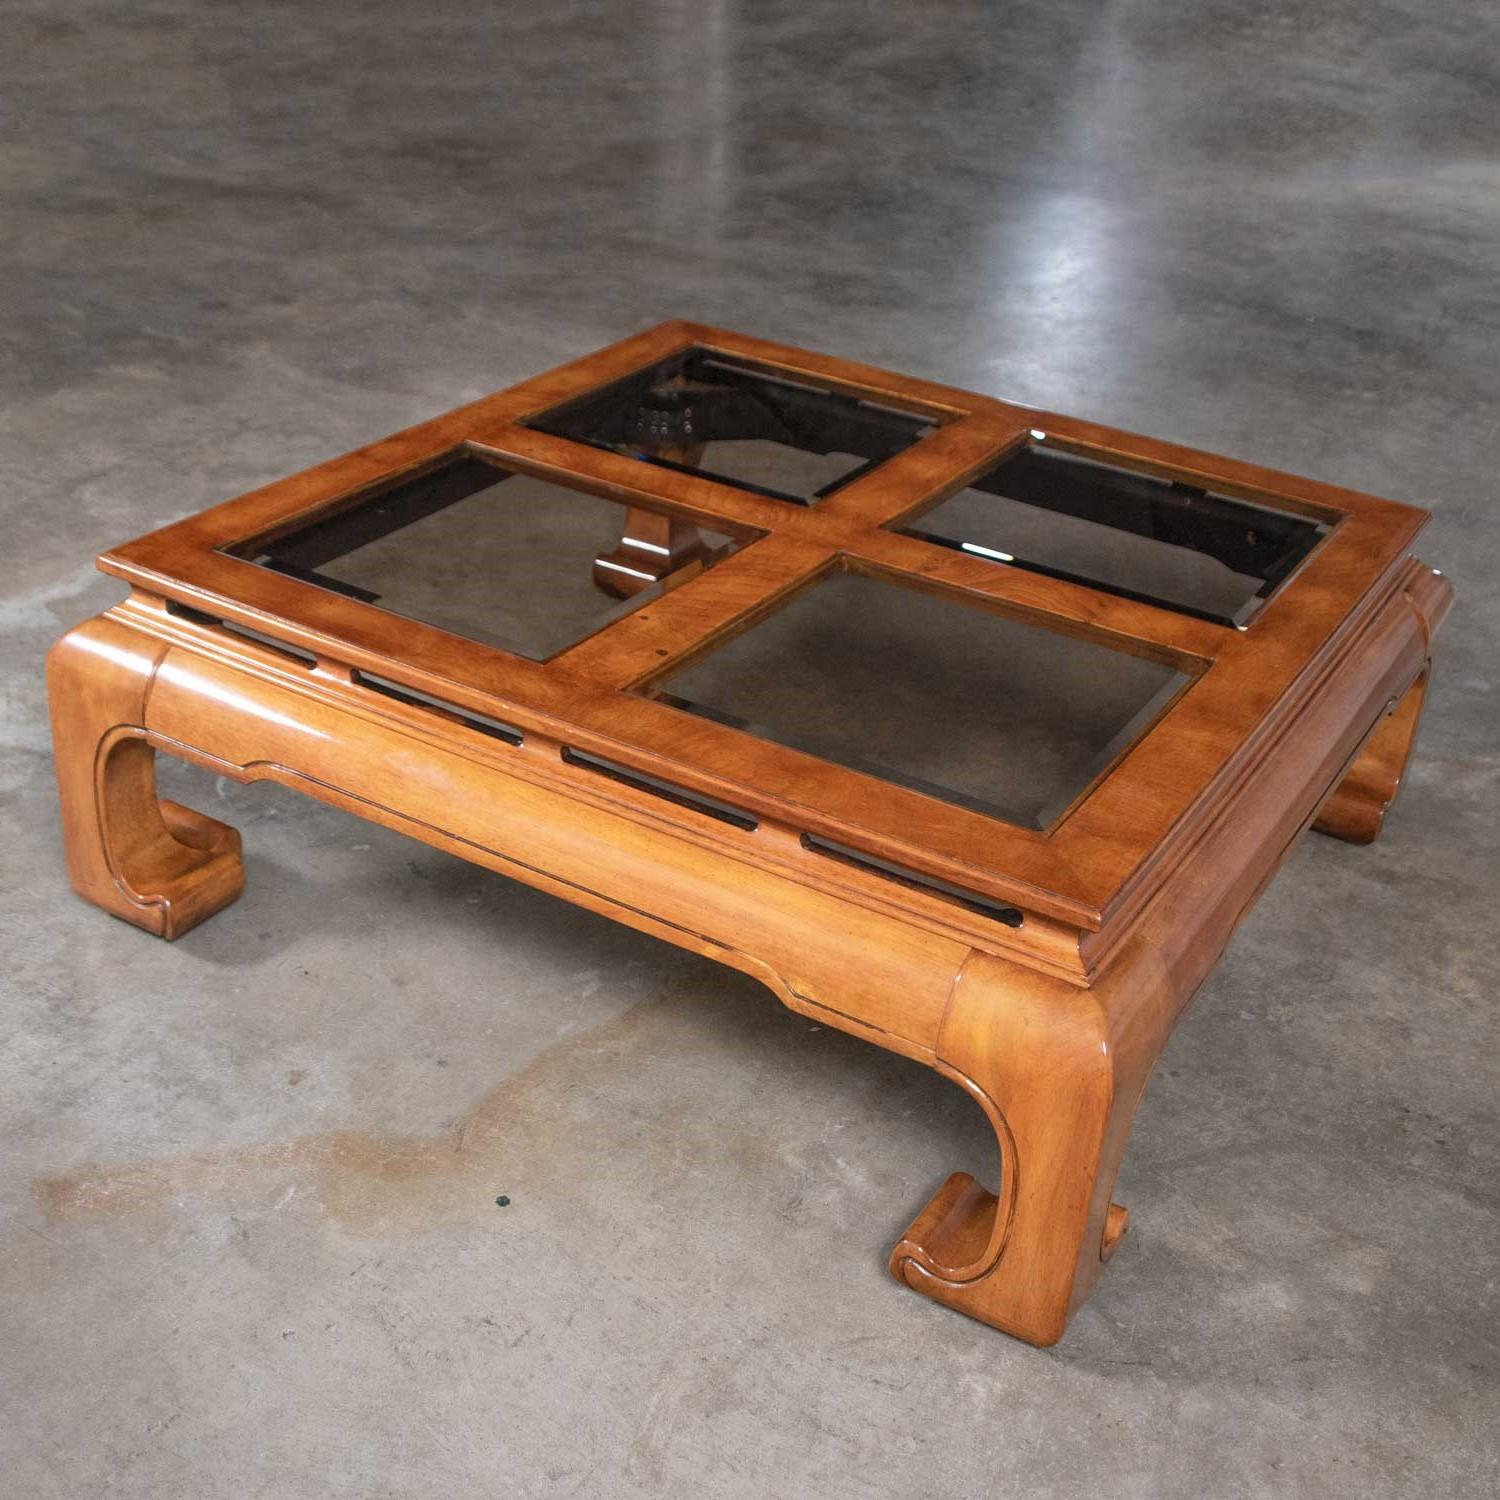 Fabulous chinoiserie chow leg Ming style large square coffee table with four beveled smoke glass inserts in a burl wood veneer frame. Attributed to Schnadig International Furniture. In wonderful vintage condition with only age appropriate wear and